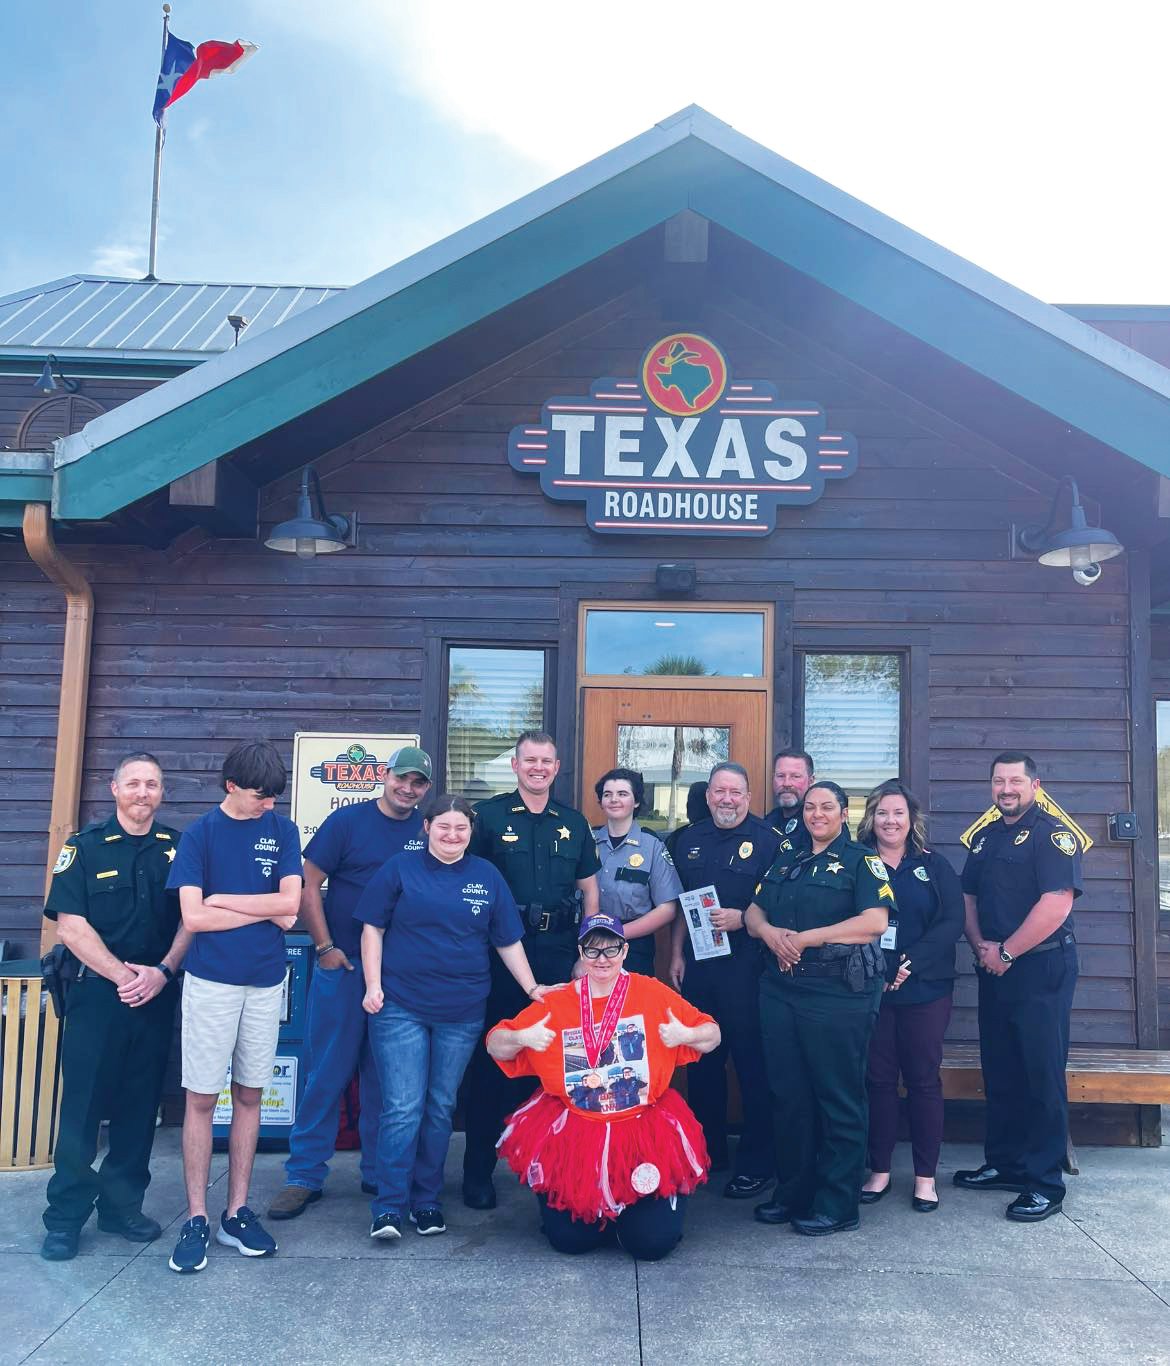 Members of the Clay County Sheriff’s Office and Orange Park Police Department join athletes and supporters of the Clay County Special Olympics team after they collected $12,009 in three nights at Texas Roadhouse during its annual Top-A-Cop program. The money will send county athletes to the Florida Special Olympics Games at Walt Disney World in May.